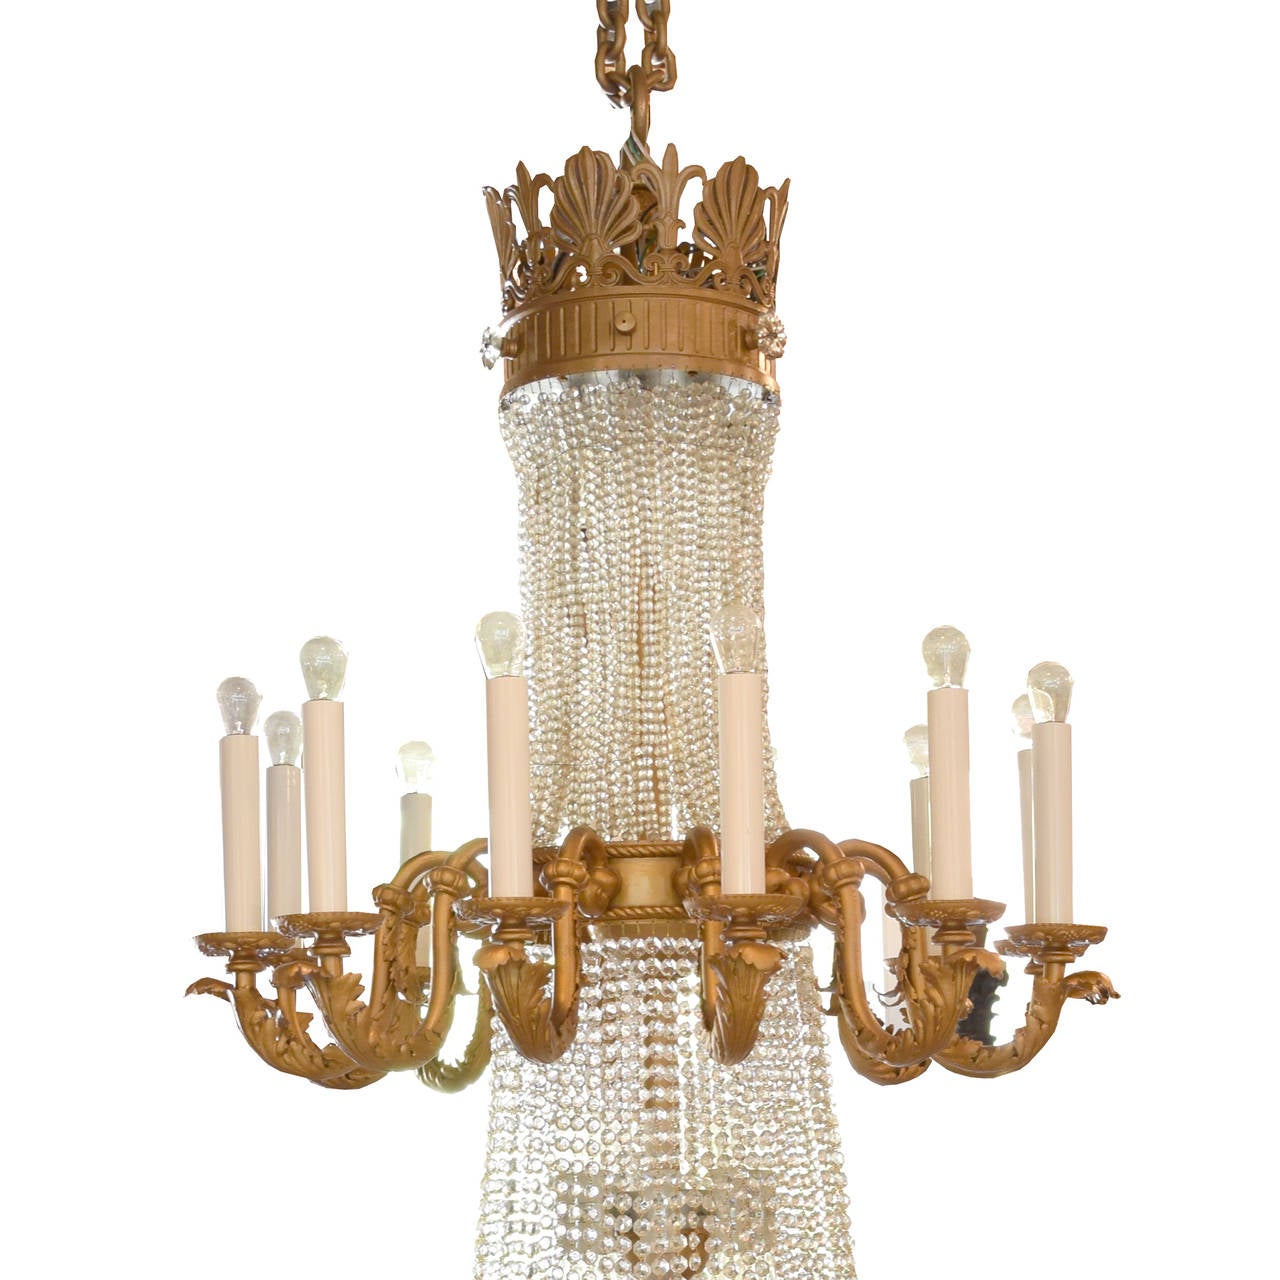 Early 20th century two-tiered Empire-style chandelier from the historic Palace Theater (1920-1951) Cicero, Illinois,  fully restored with 24 arms. The Palace Theater was a known hang-out of Al Capone.